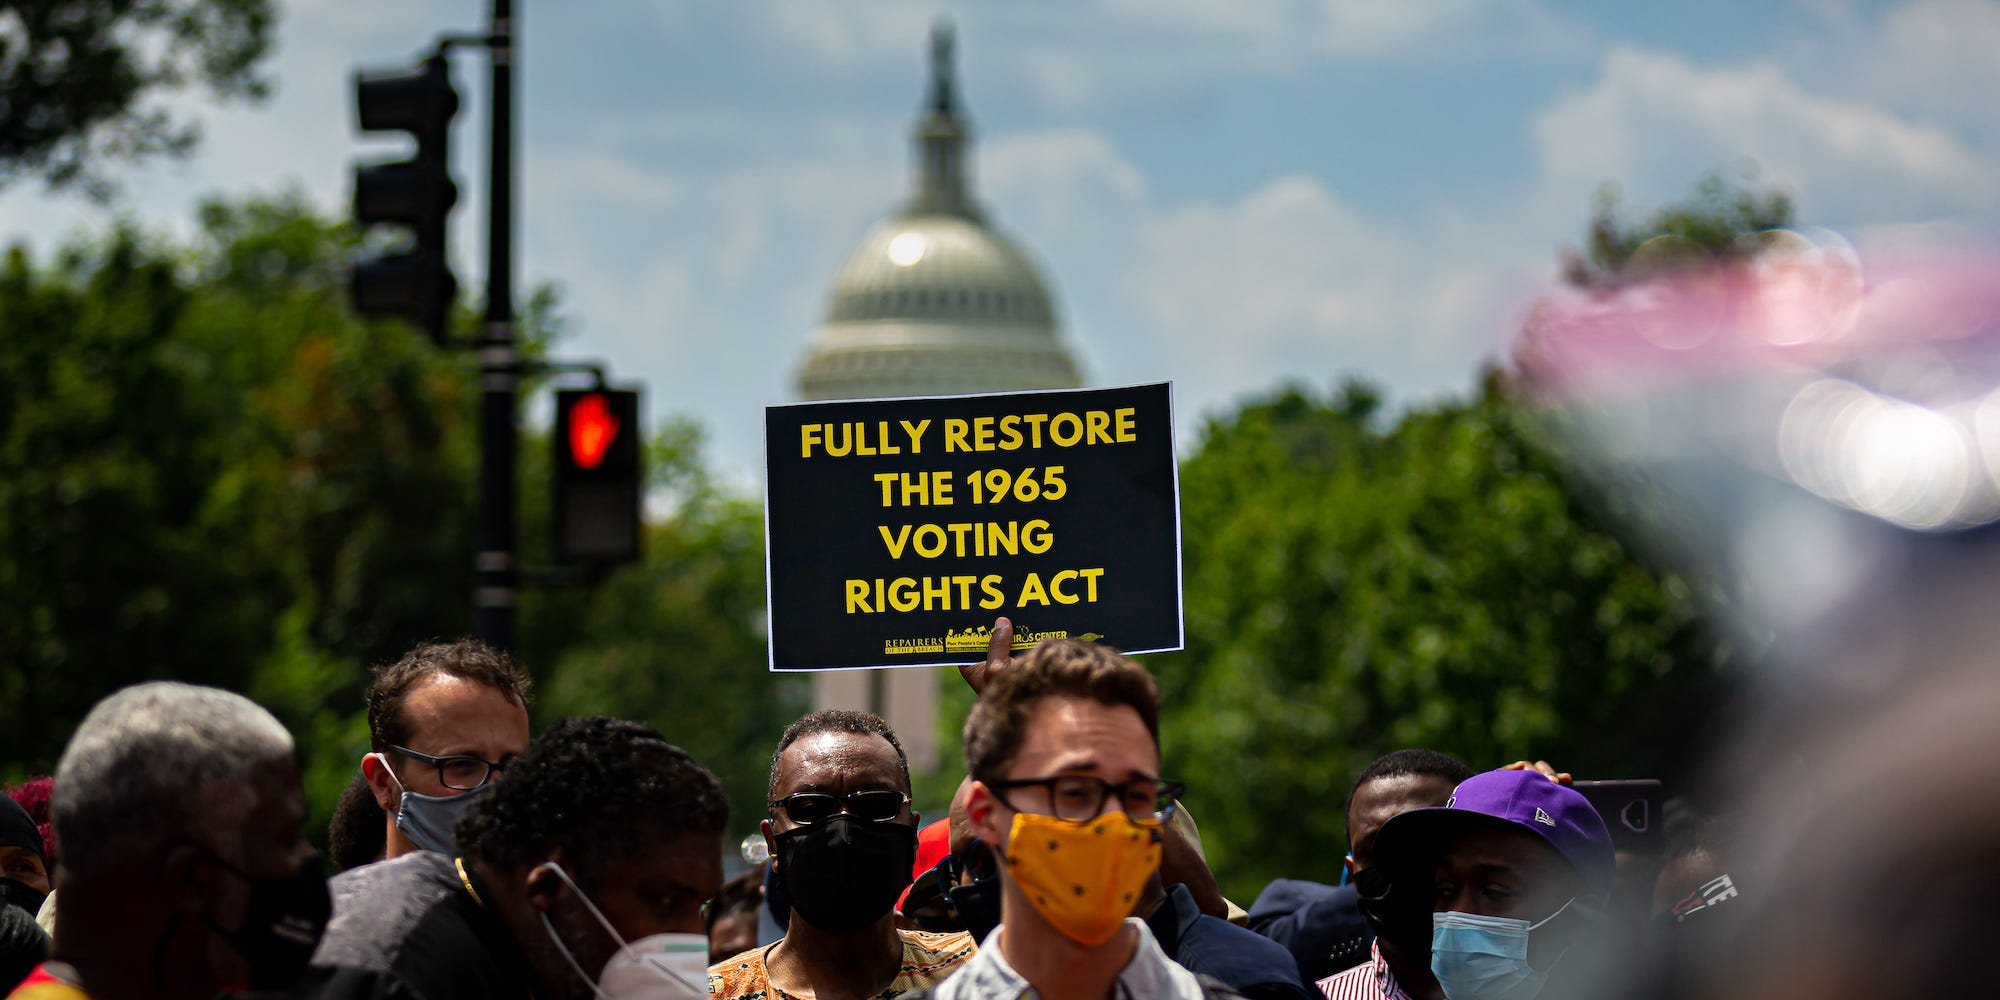 The Poor People's Campaign rallied and marched in Washington DC, where faith leaders, low-wage workers, and poor people from around the country protested for the US Senate to end the filibuster, protect voting rights, and raise the federal minimum wage to $15 an hour.